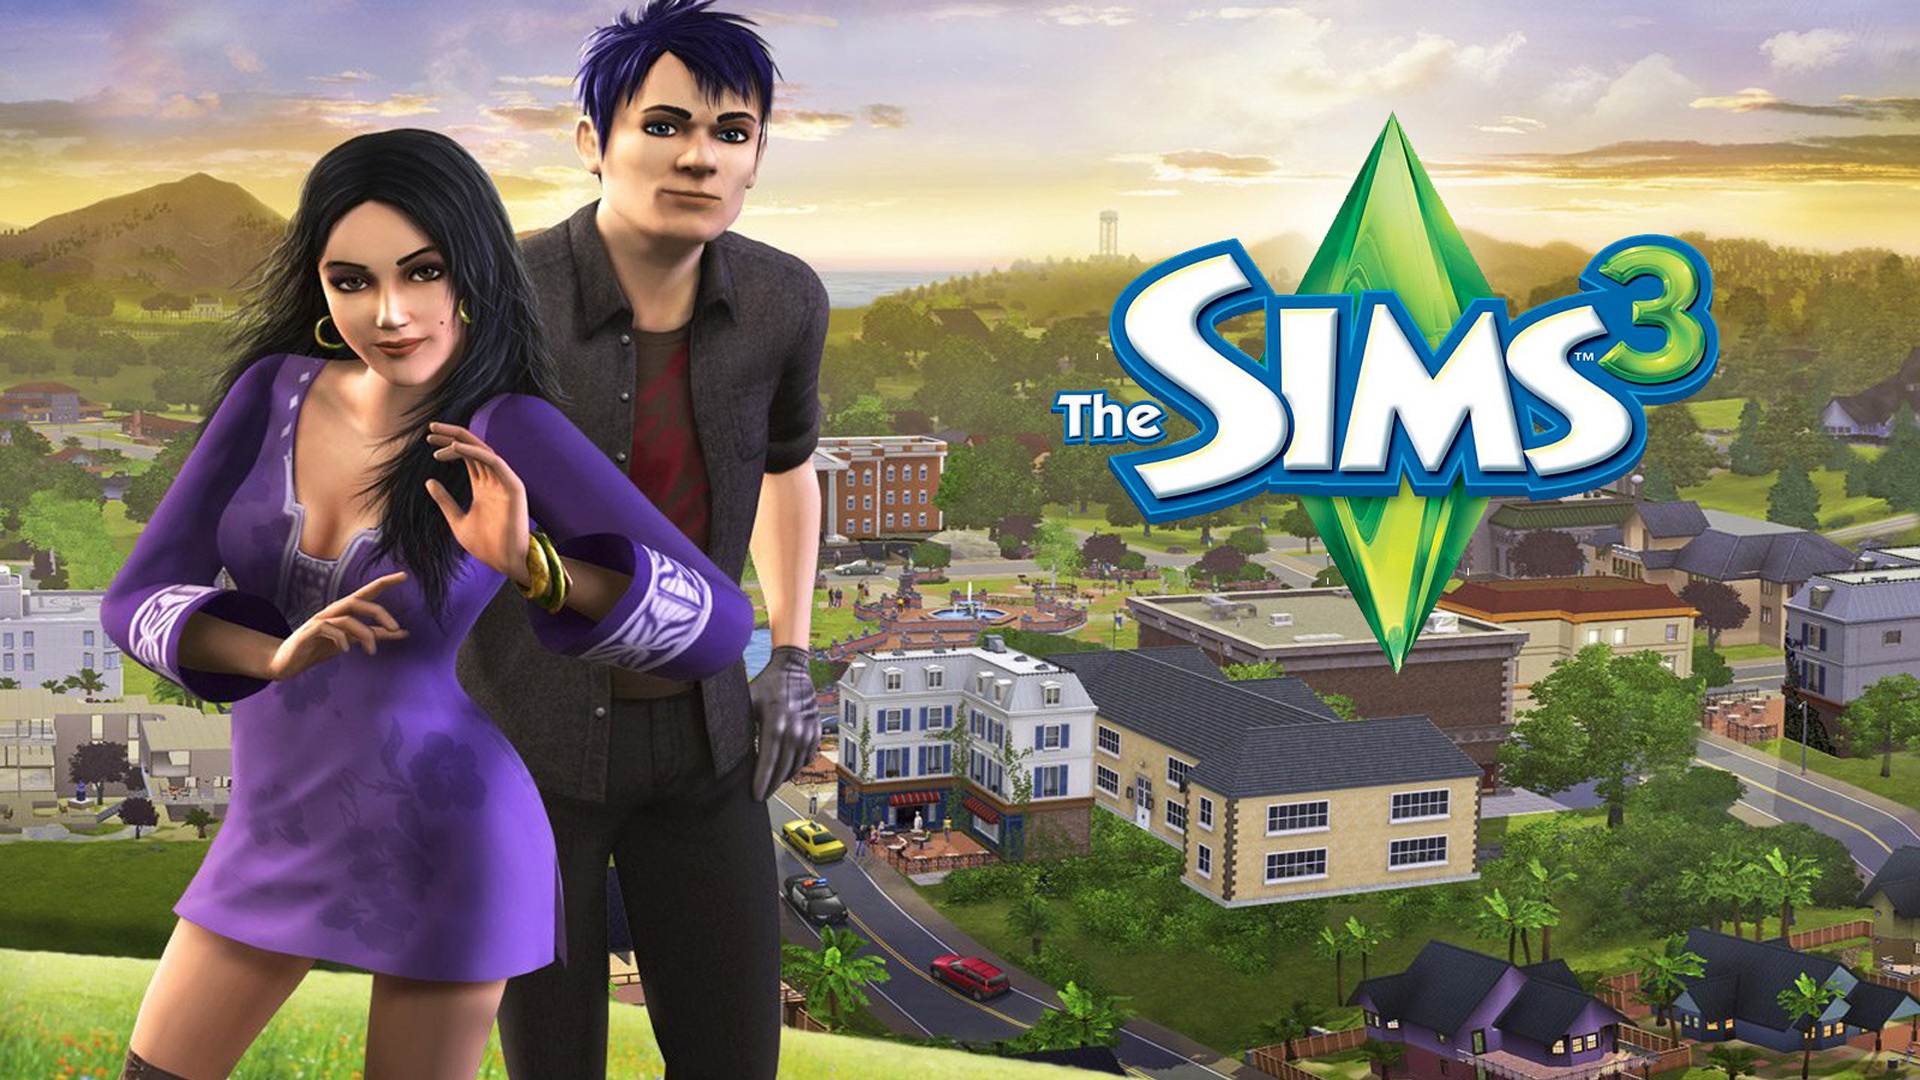 sims 2 all expansions download